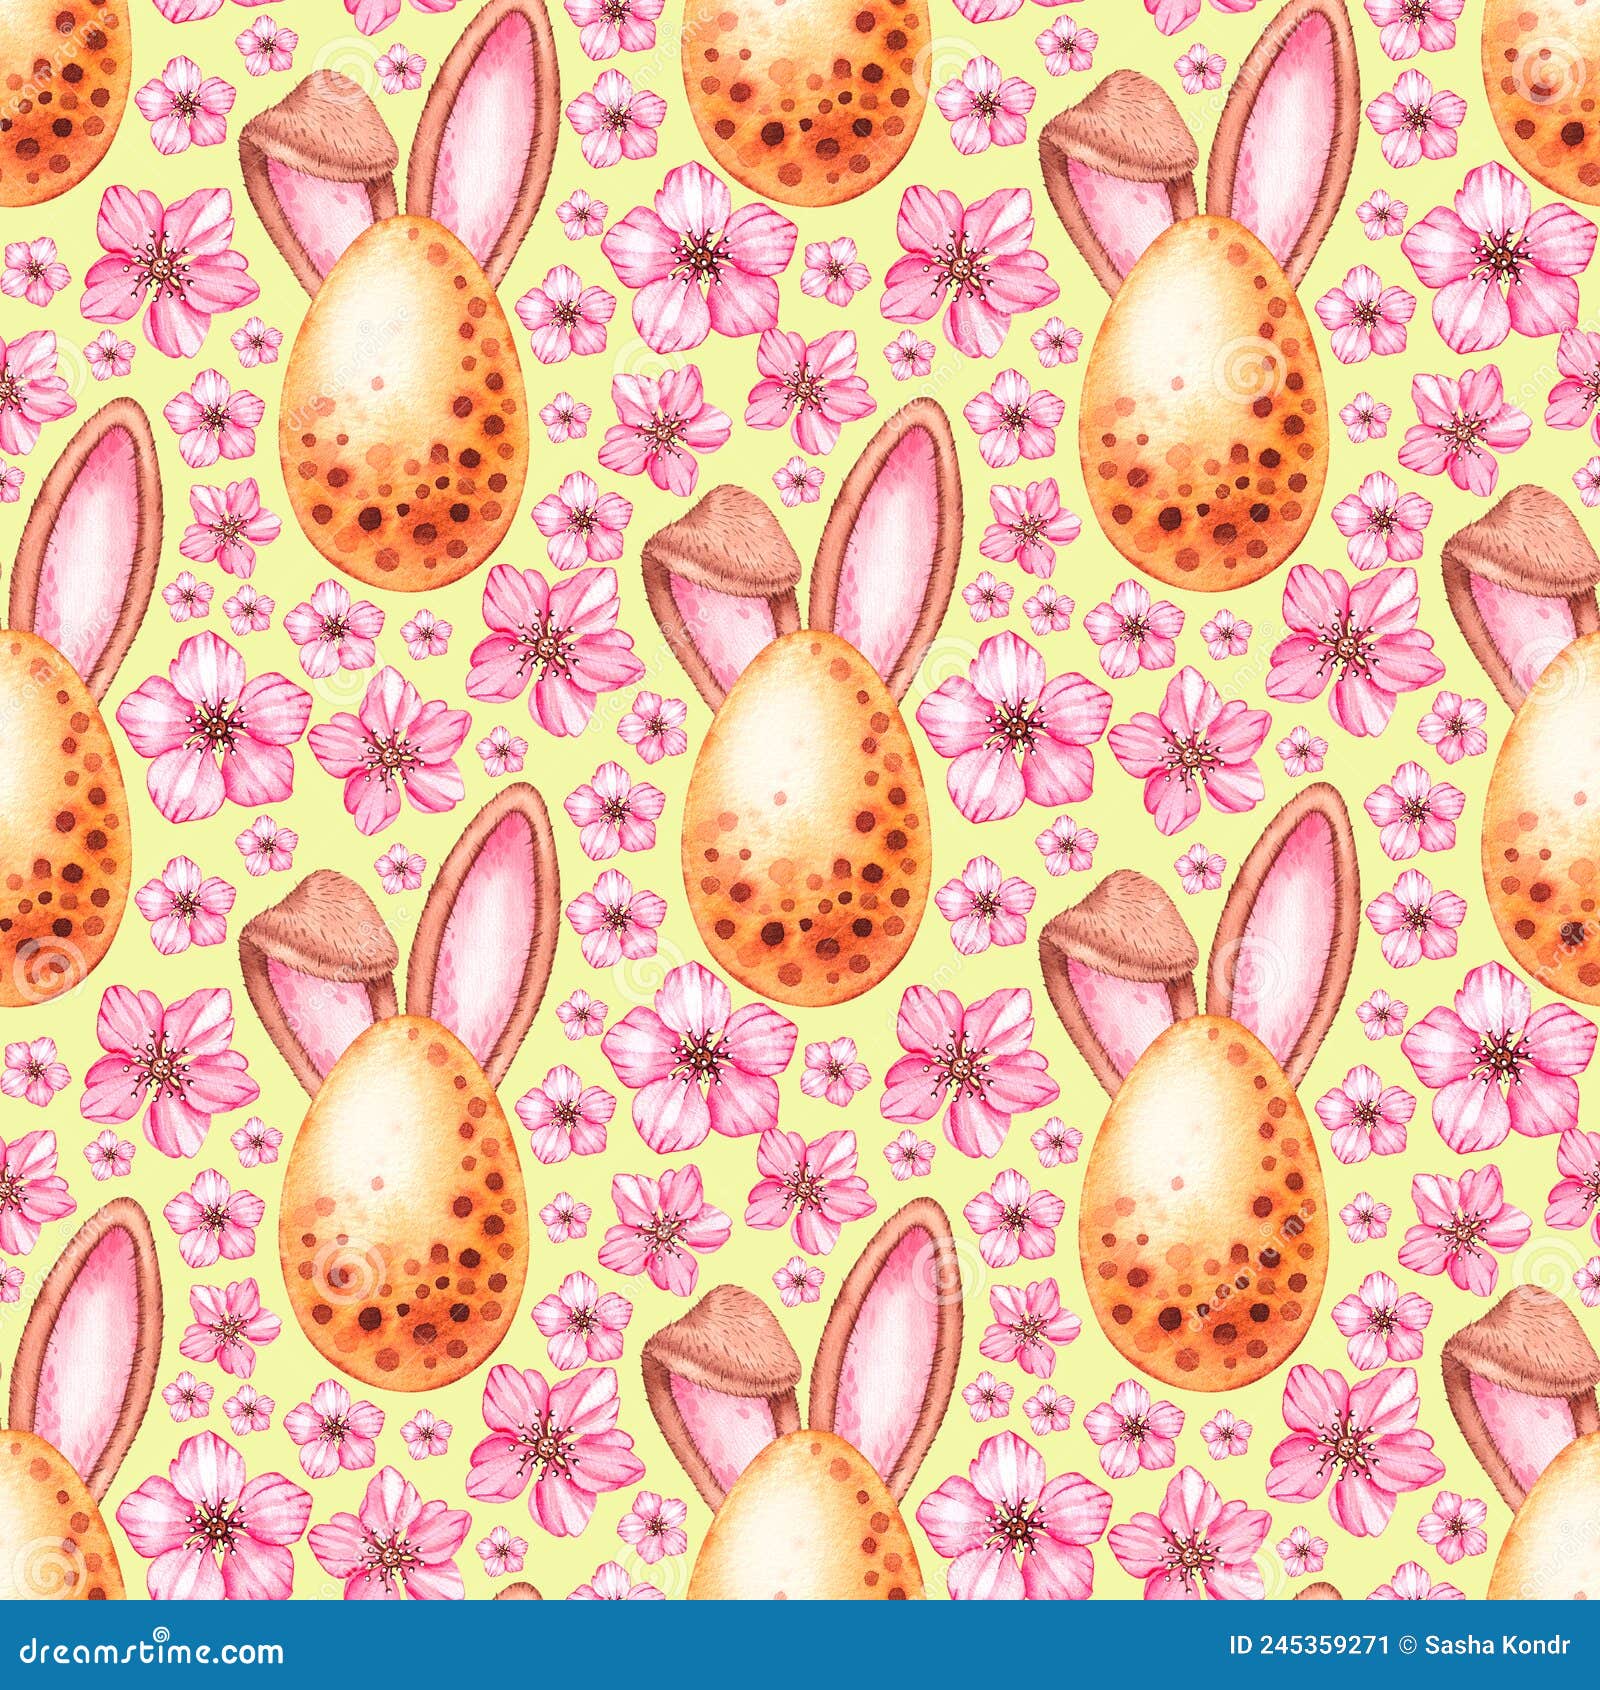 wallpaper stationery Easter bunnies pattern Forest pattern Watercolor seamless pattern Digital download Printable Pattern for fabric